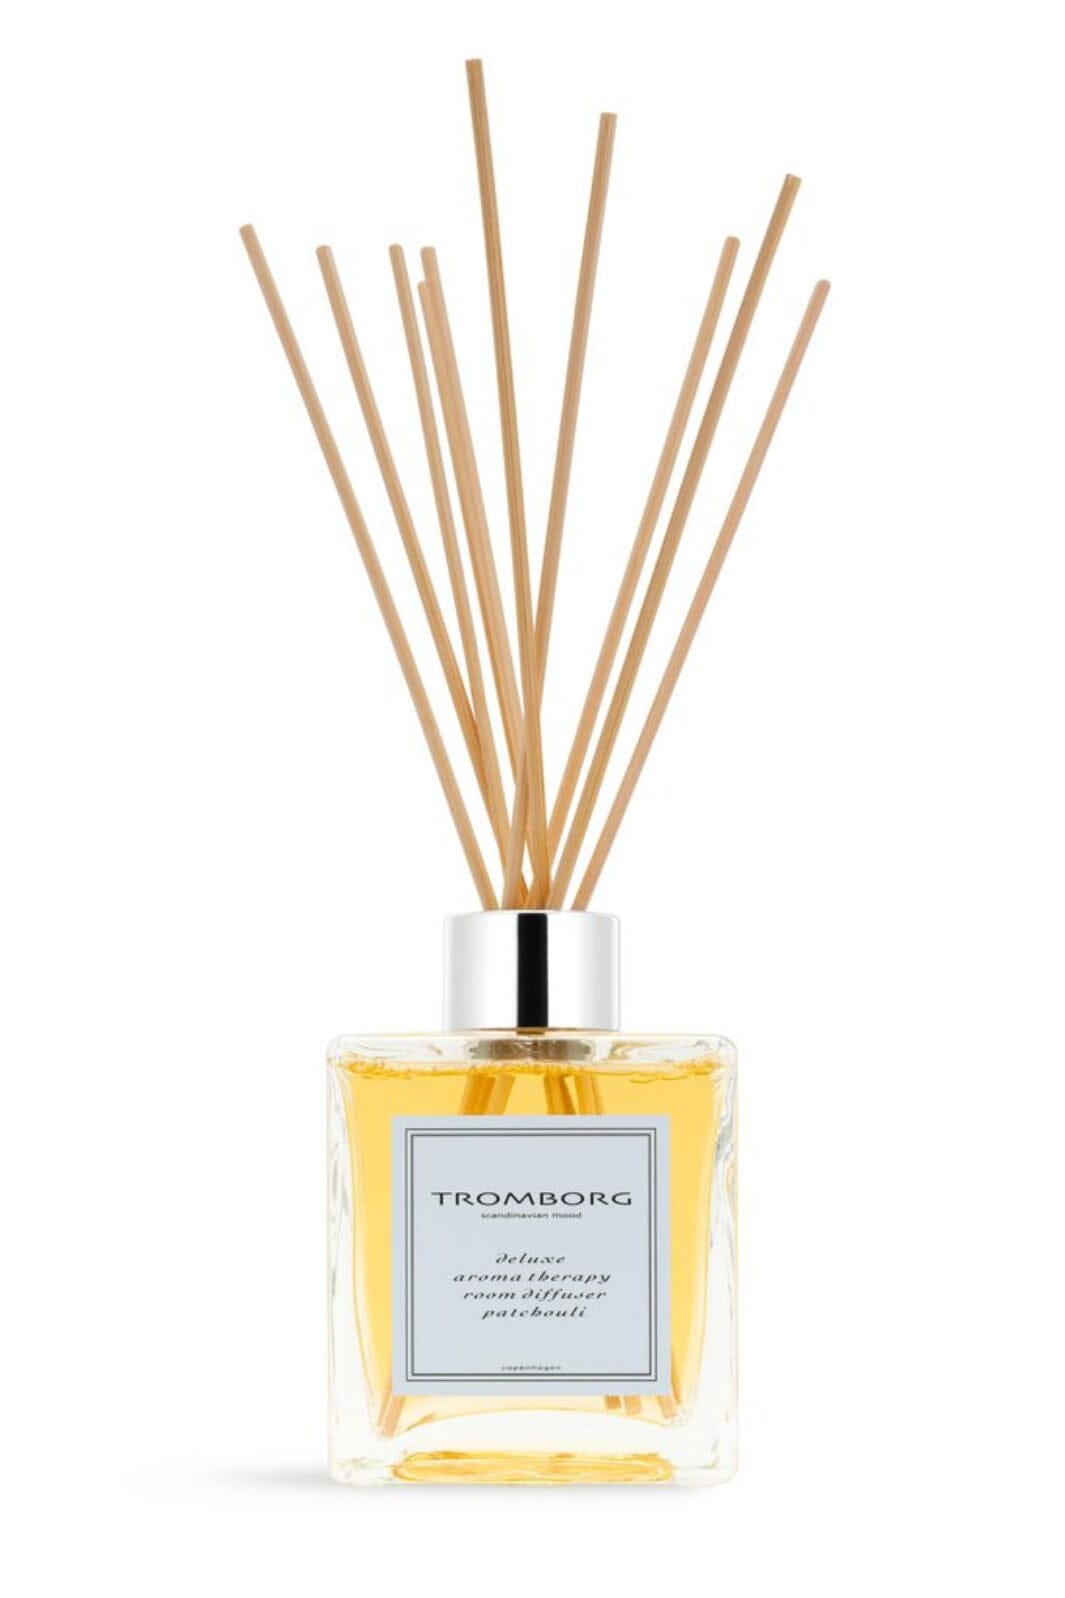 Tromborg - Aroma Therapy Room Diffuser Patchouli Duftfrisker 